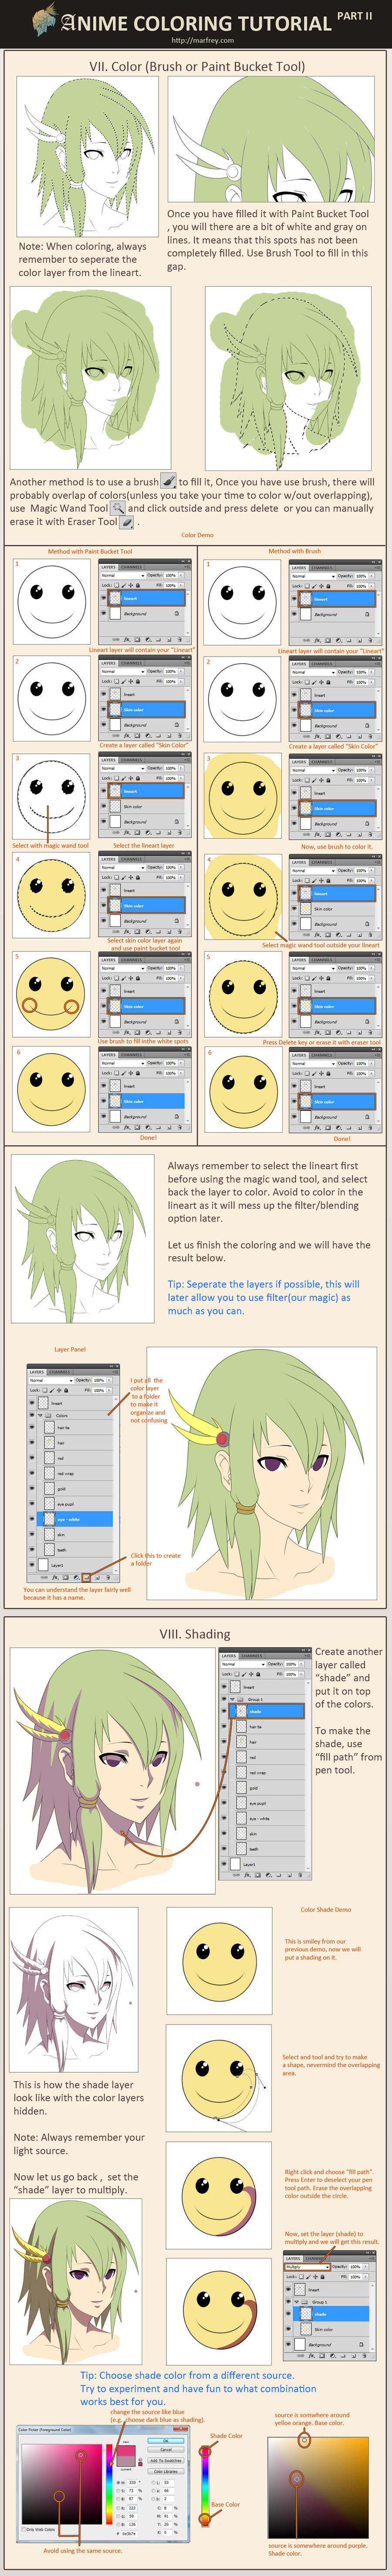 Anime Coloring Tutorial Part 2 by Marfrey on DeviantArt